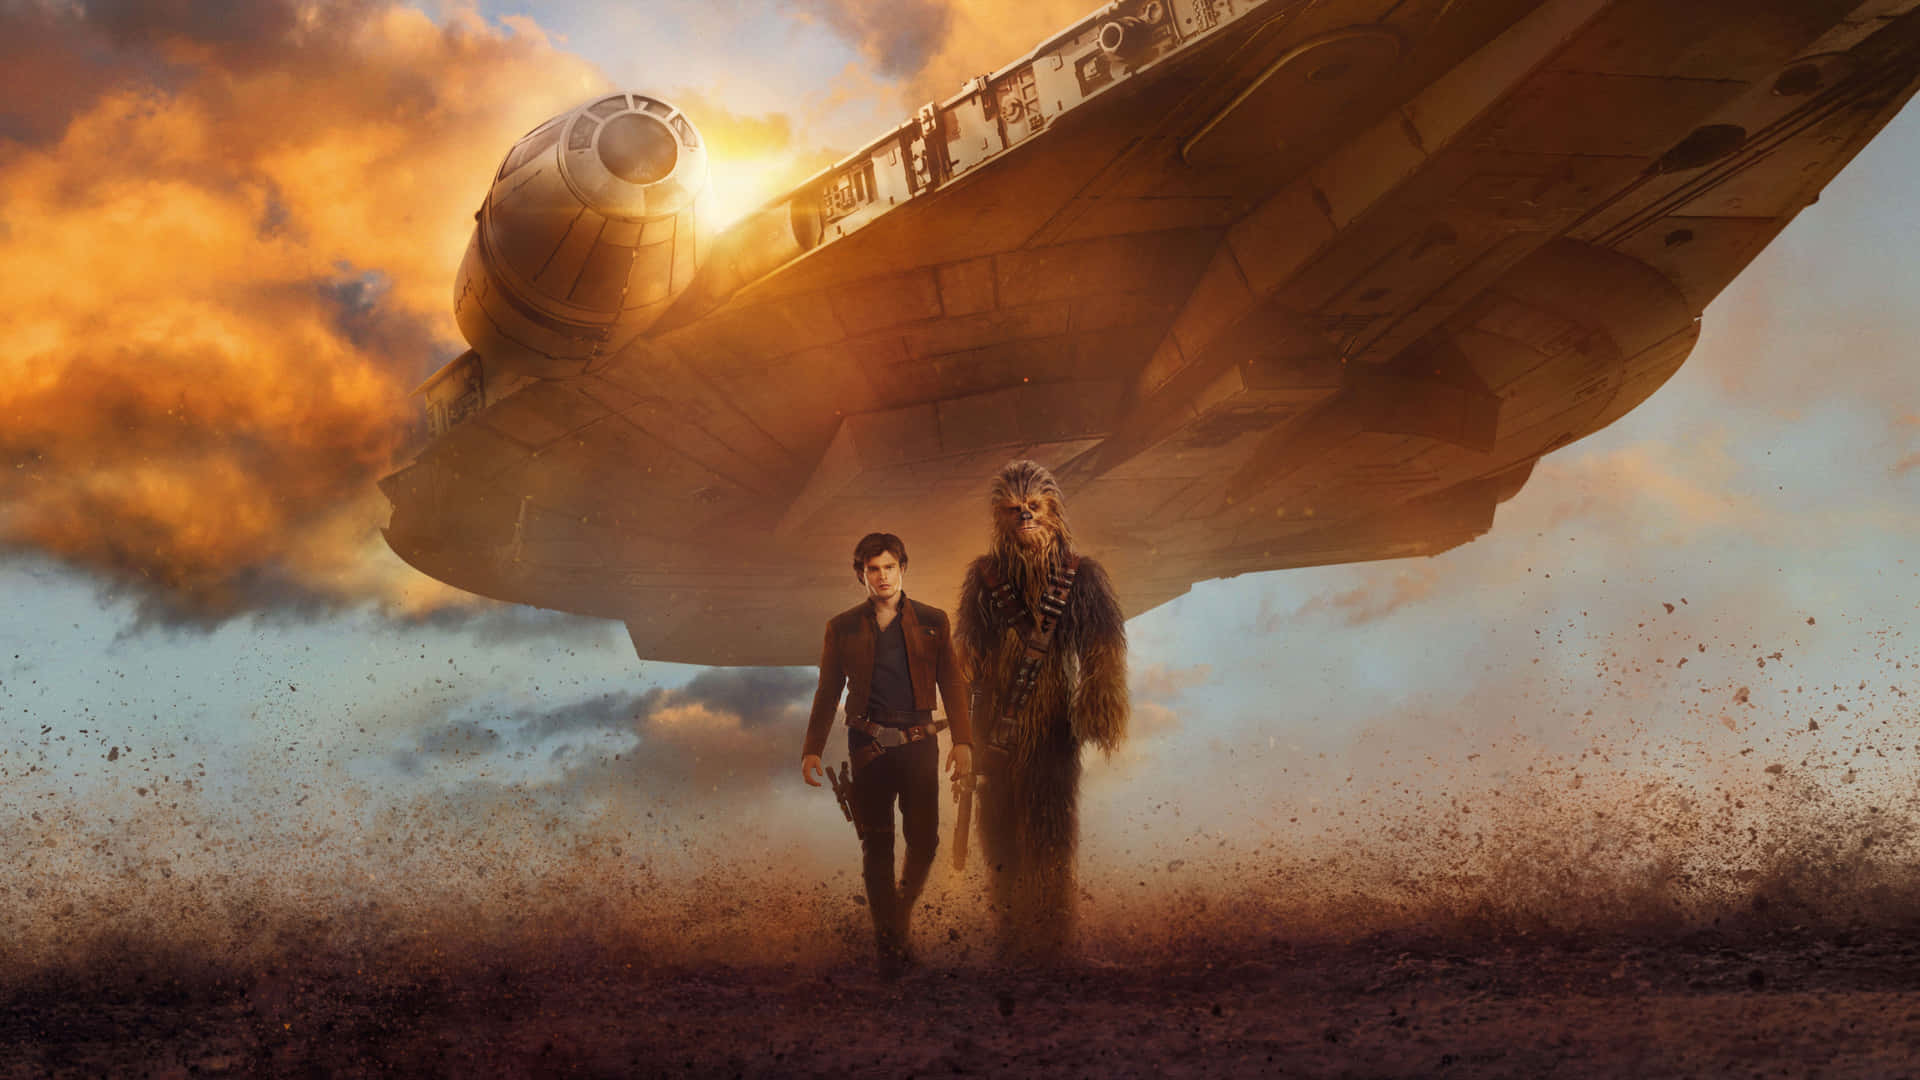 Cassian and Jyn Erso take a ride on the legendary Millennium Falcon. Wallpaper